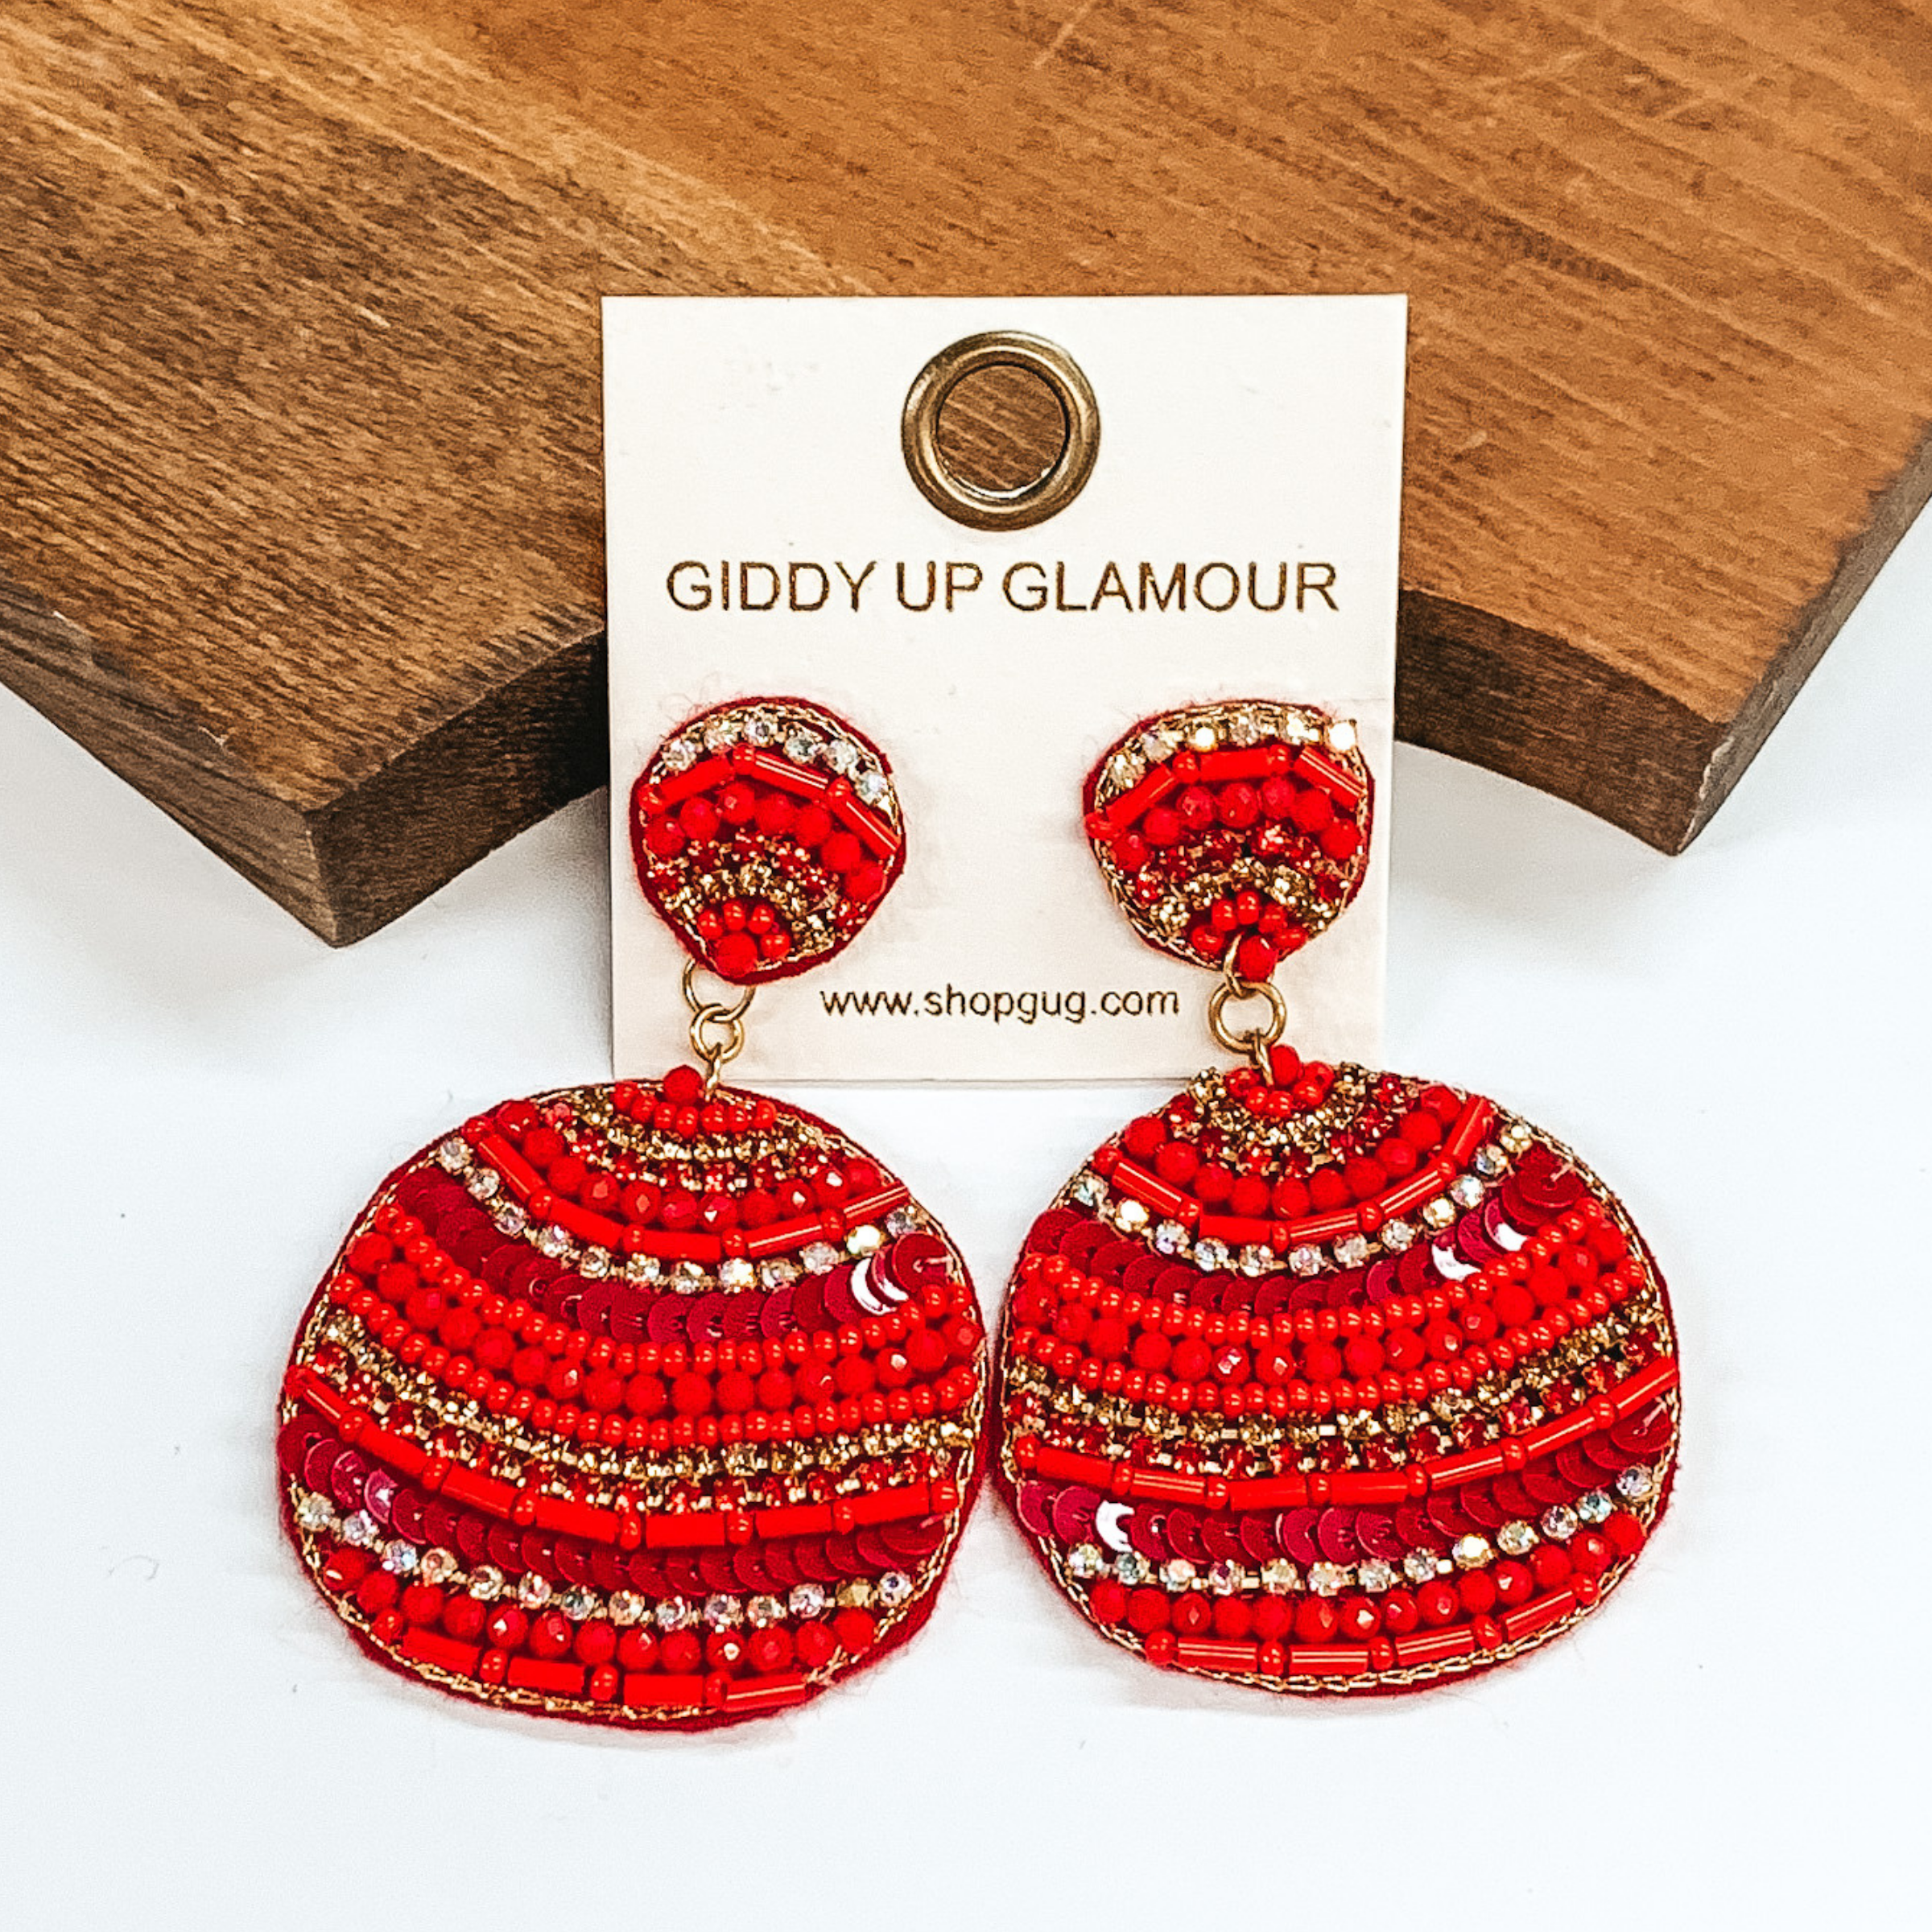 Red cirle drop earrings with different striped beaded patterns. Striped patterns in long and small  red beads, red sequins, with ab, red, and  gold crystals. Taken in a white background with a  brown block as decor.